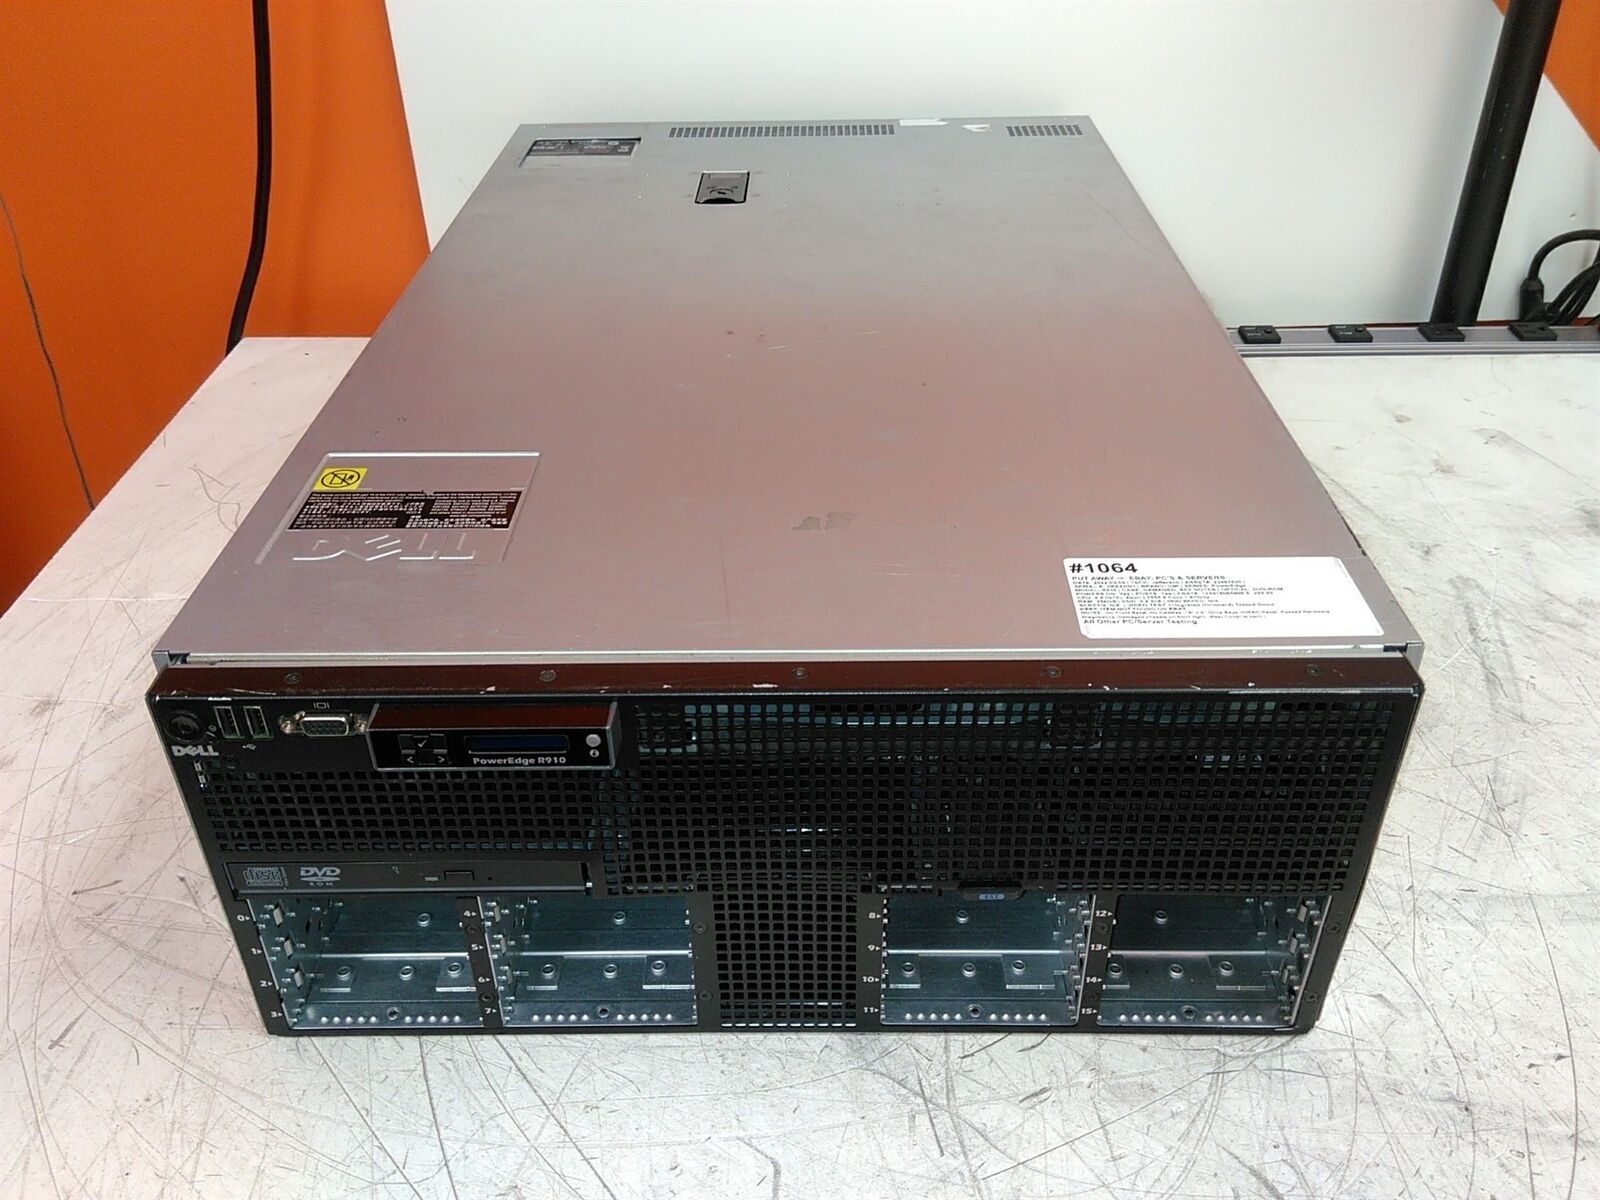 Dell PowerEdge R910 Server 2x Xeon 8-Core 1.87GHz 256GB 0HDD 4*PSU Damaged AS-IS